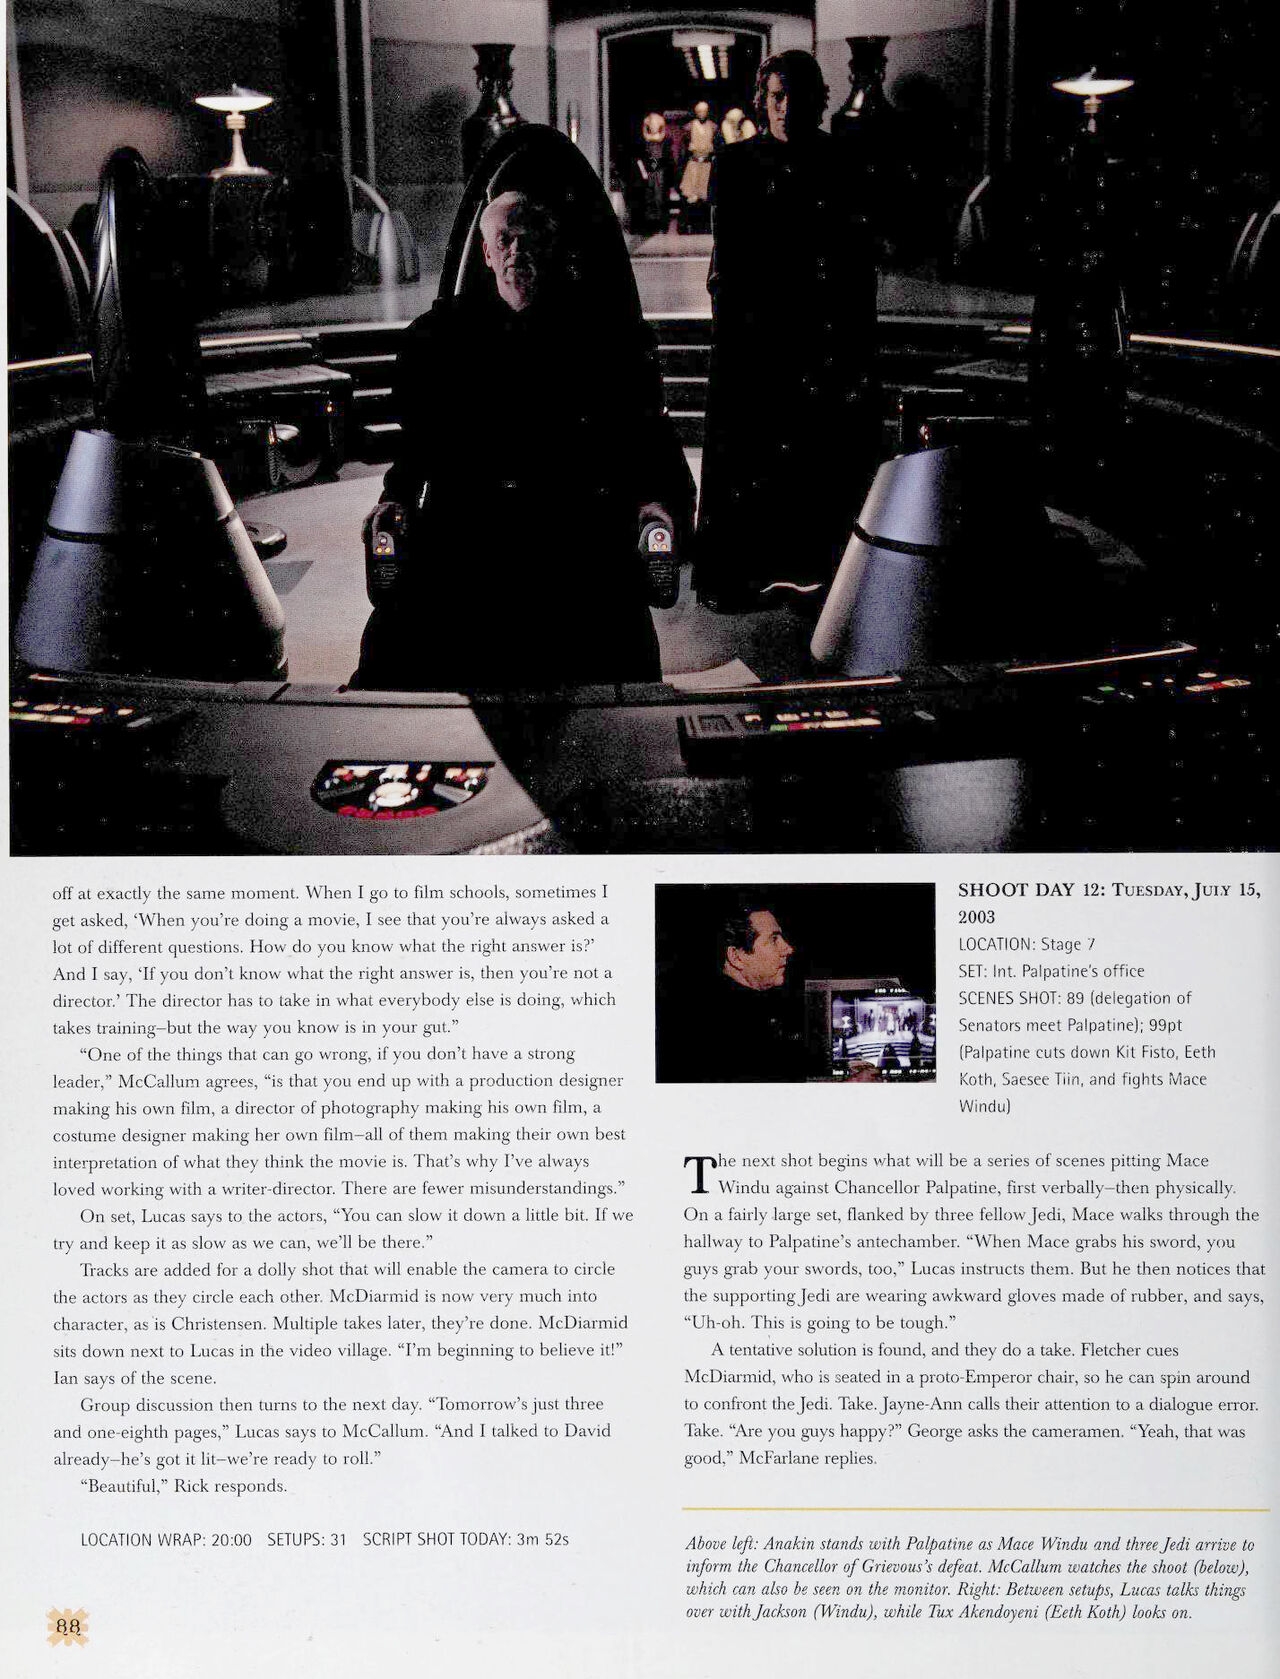 The Making of Star Wars: Revenge of the Sith 89